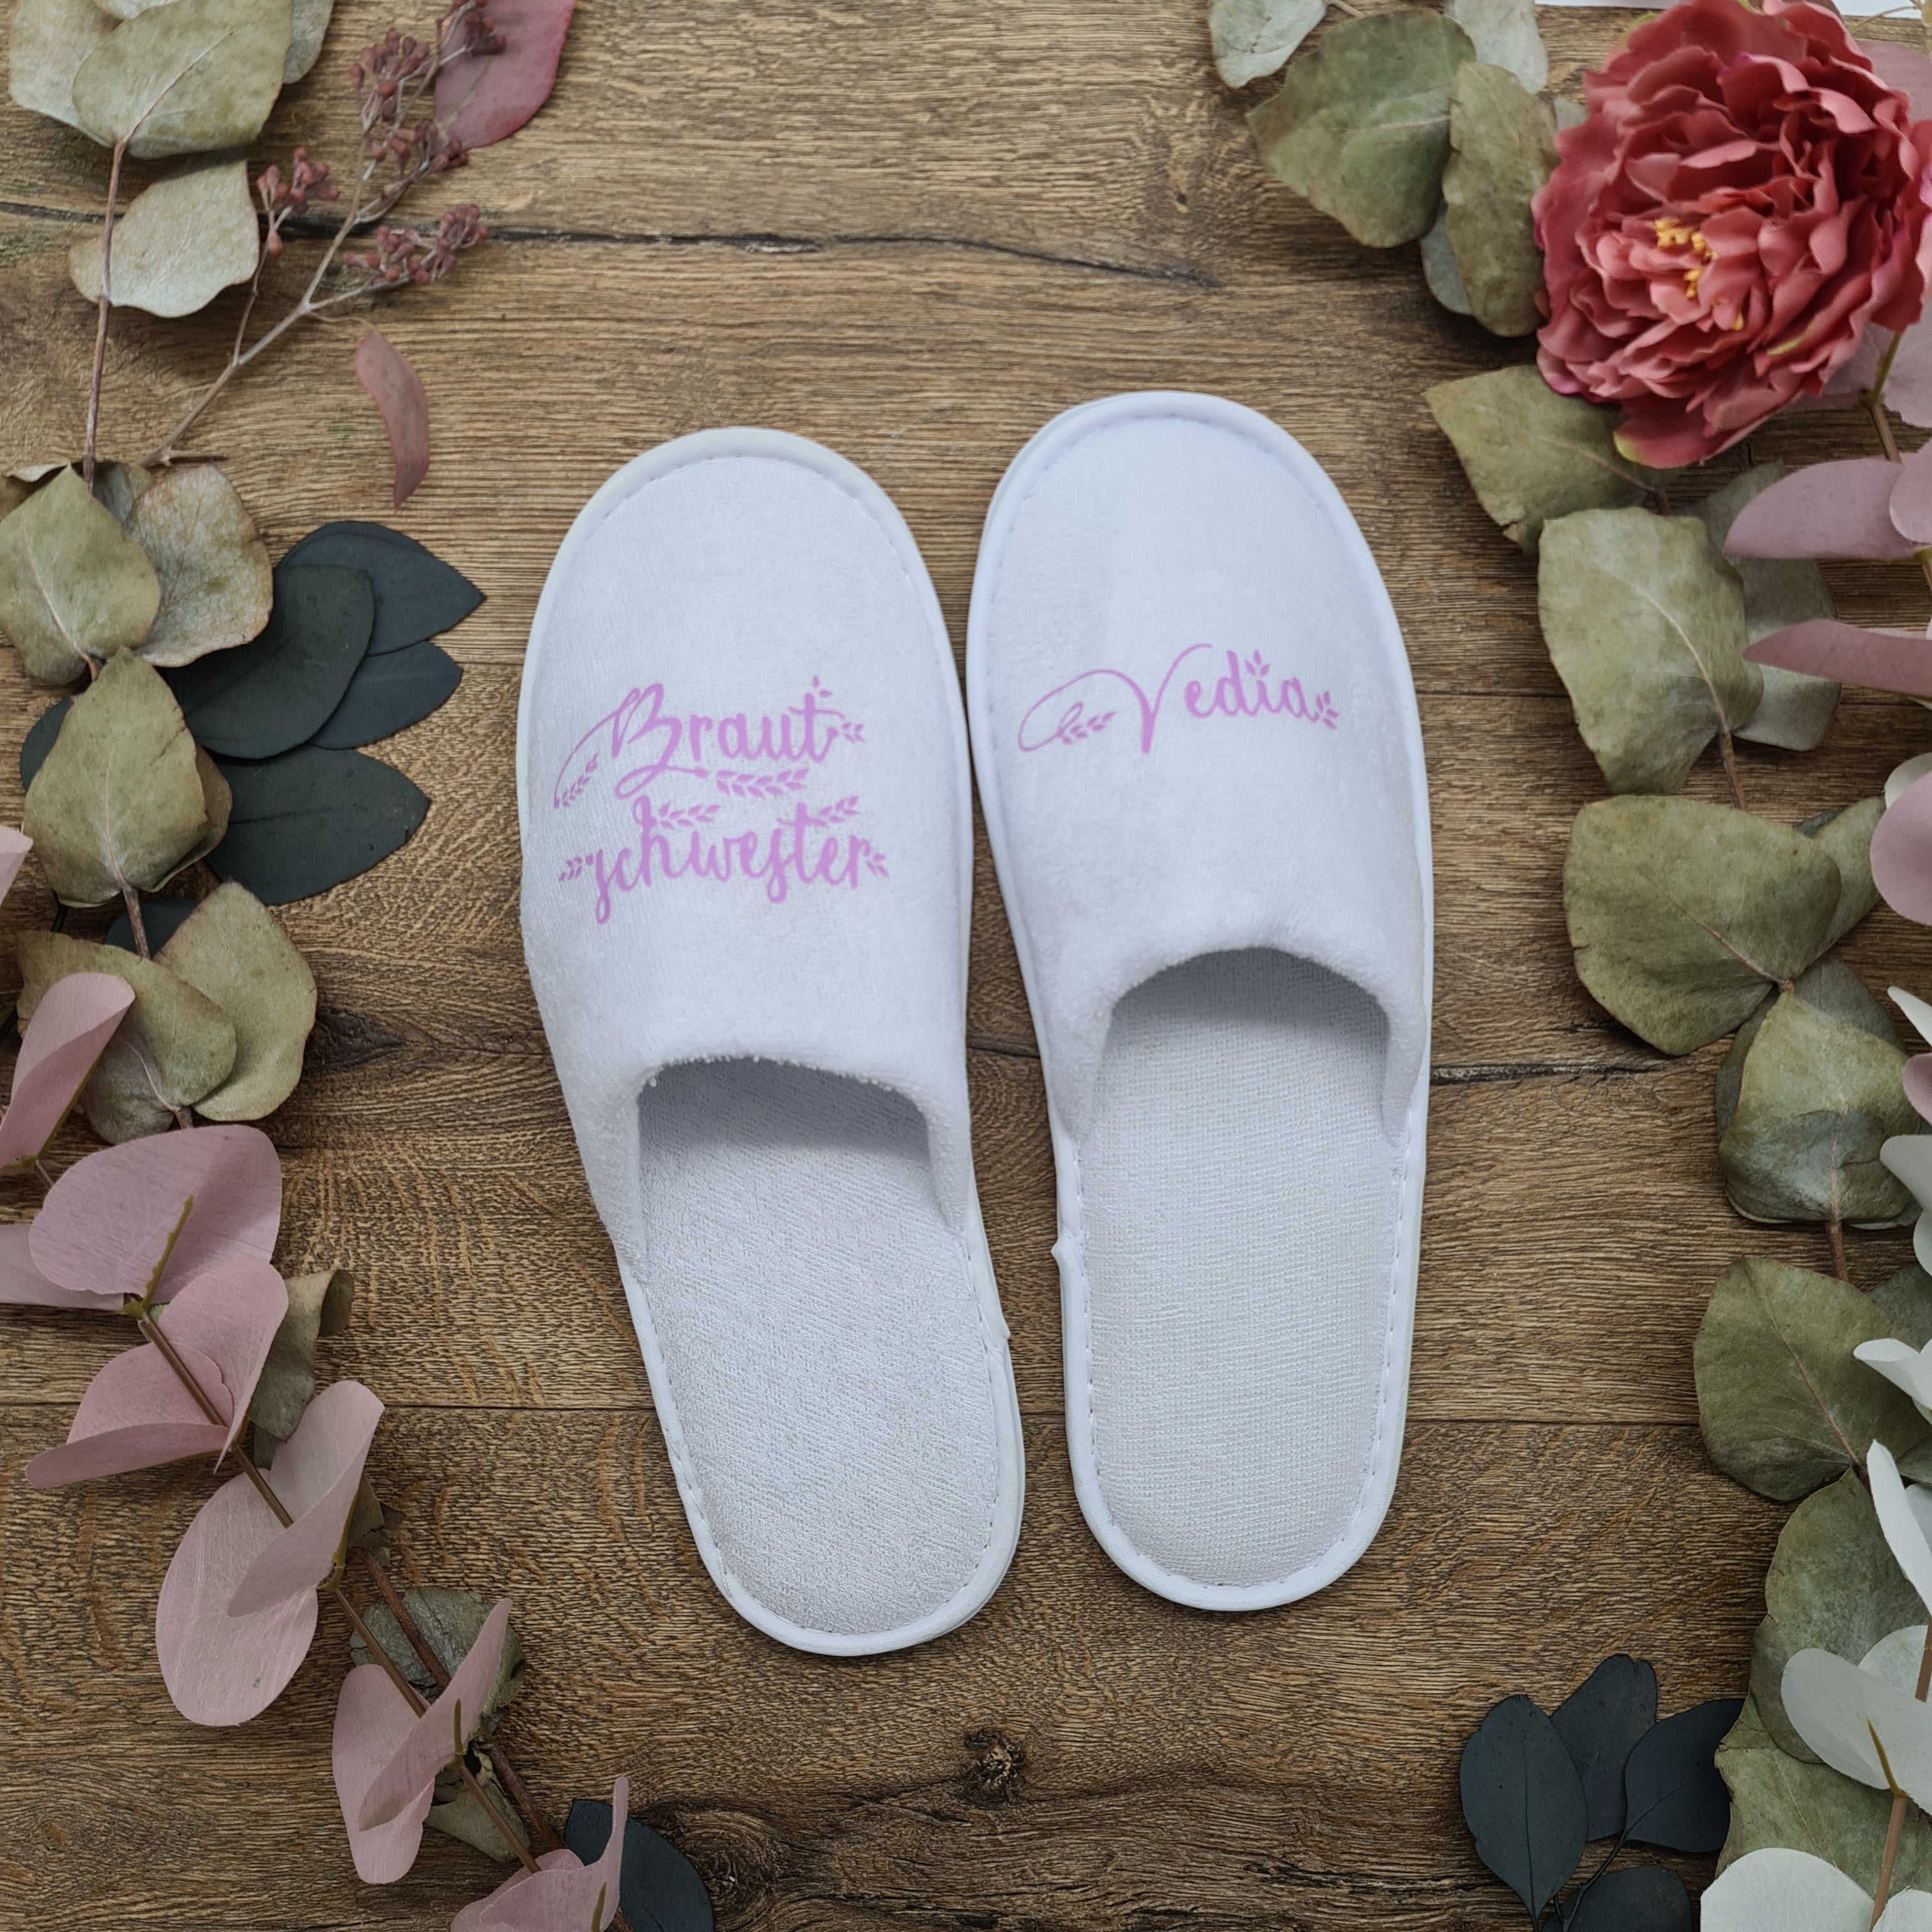 Fluffy Slippers for Wedding Day Photos, Maid of Honour Gift